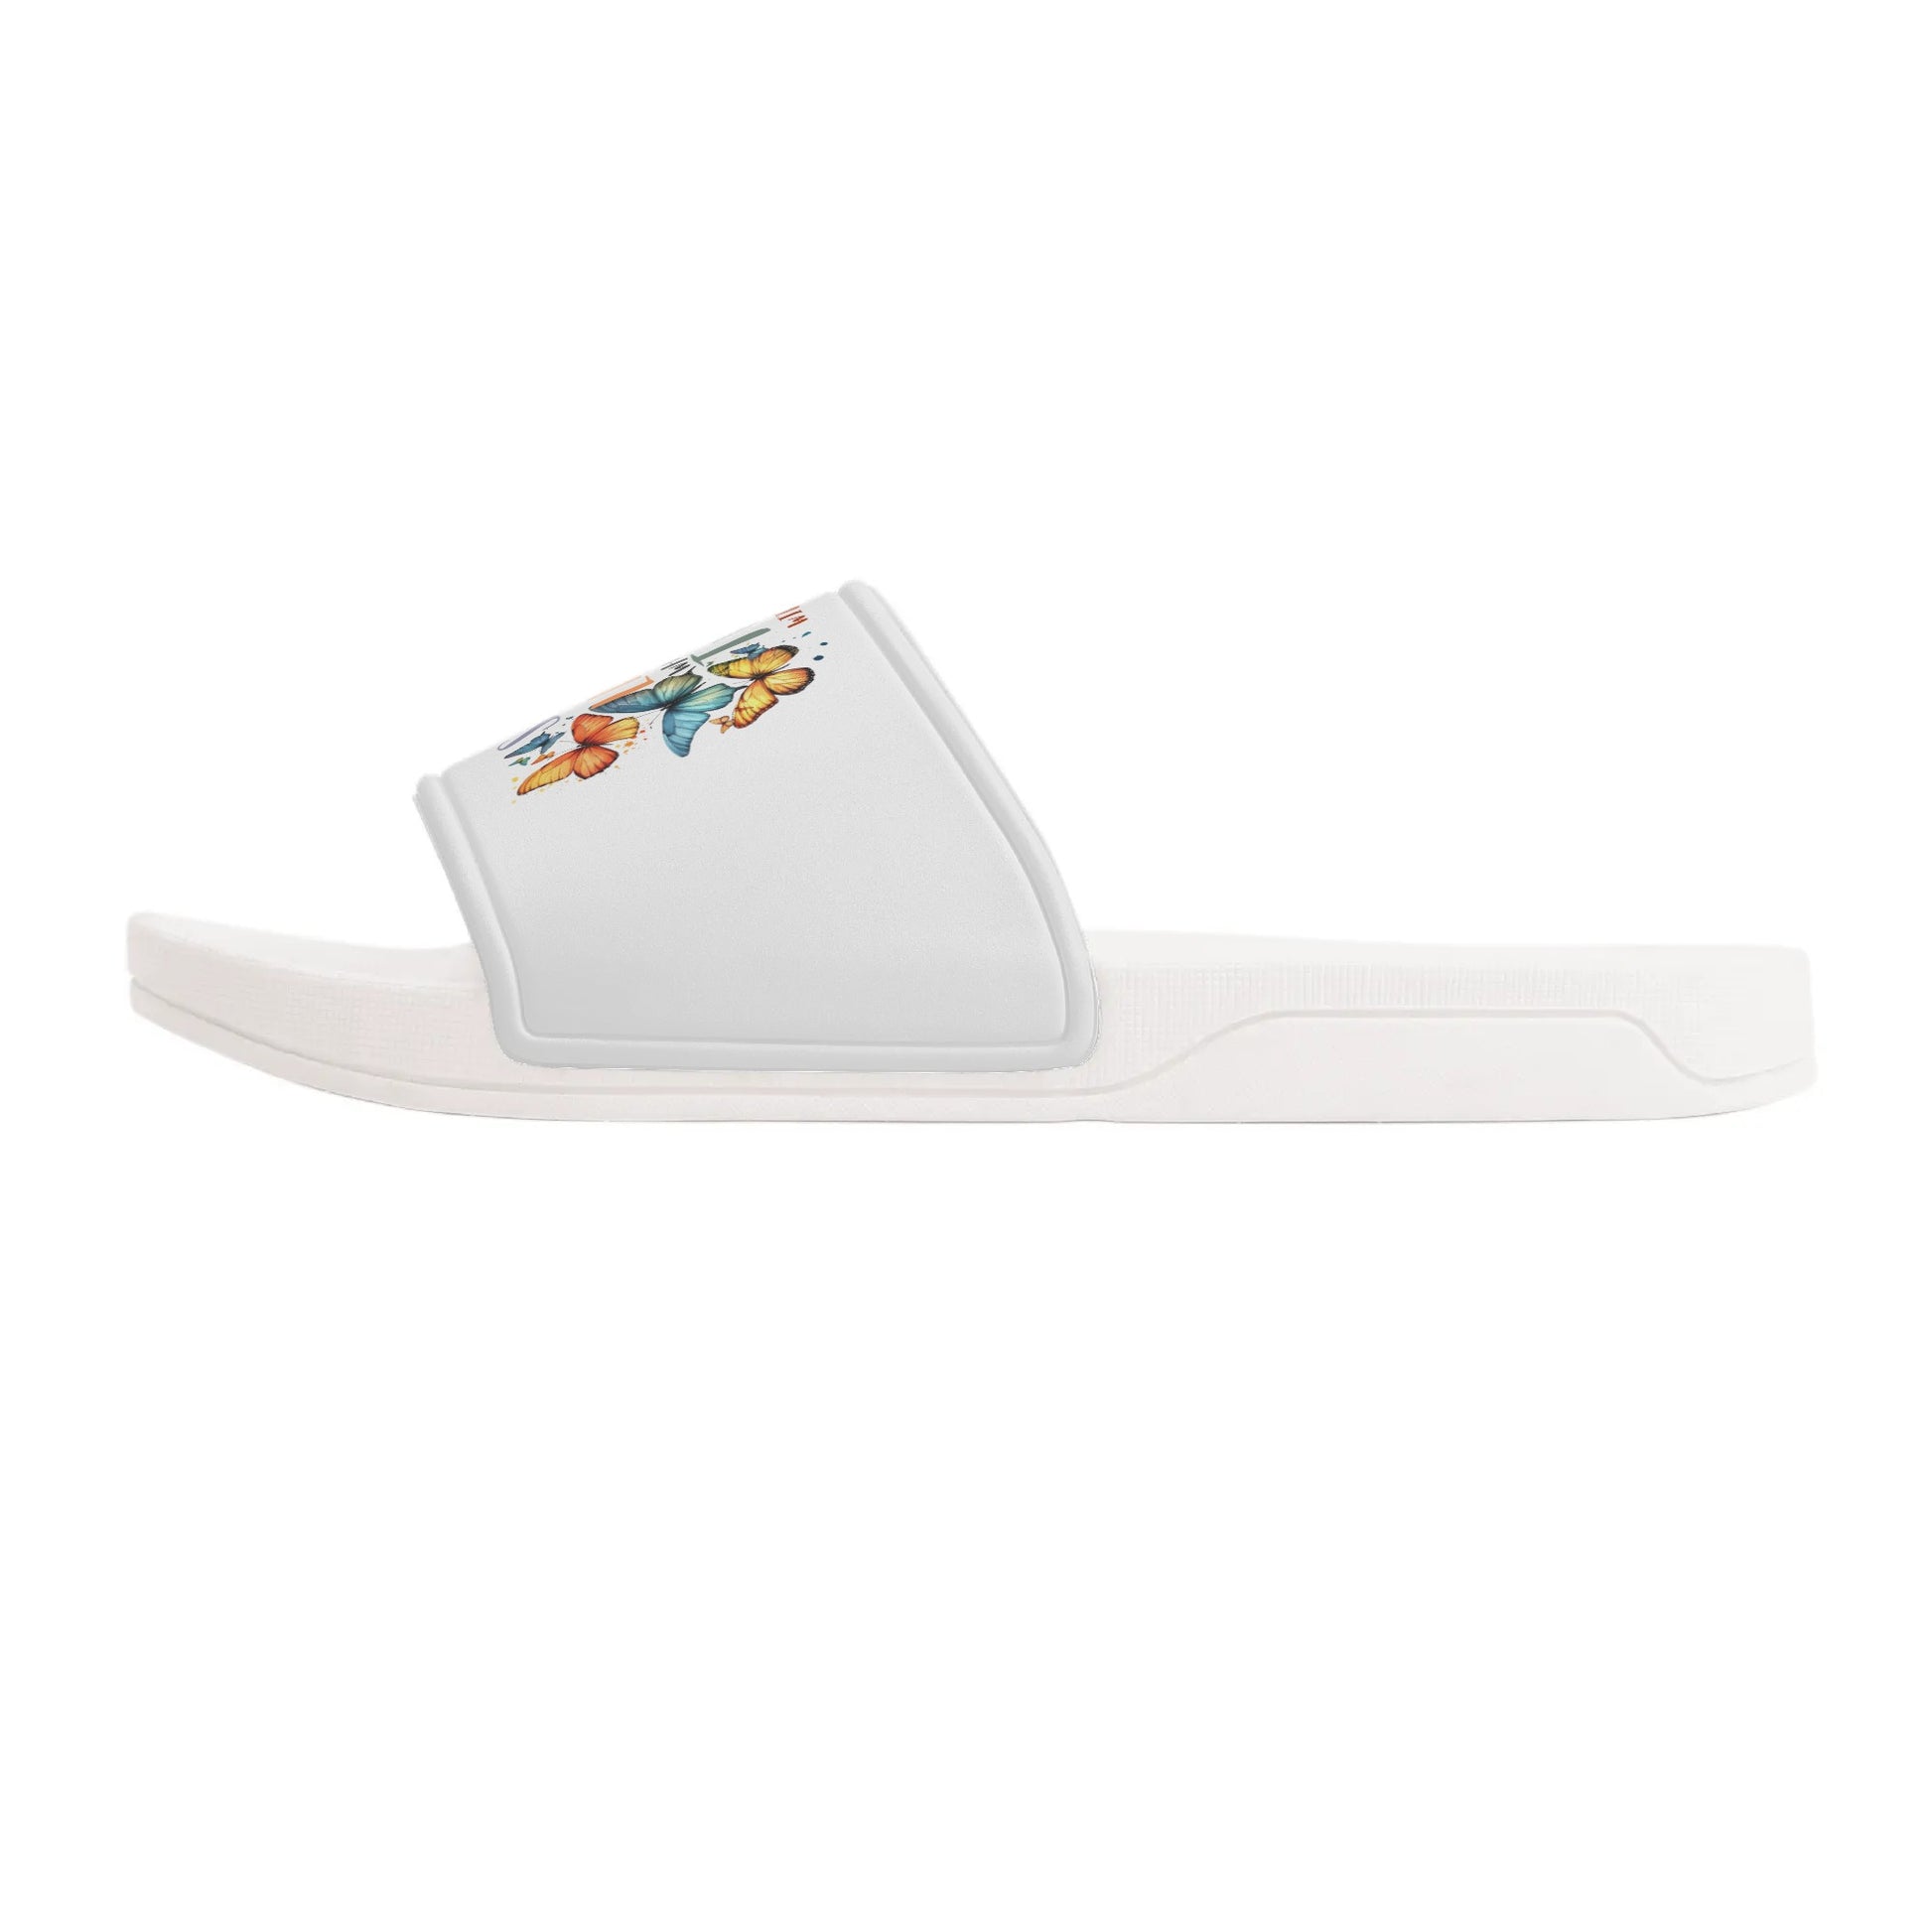 Spirit Lead Me Where My Trust Is Without Borders Kids Christian Slide Sandals popcustoms